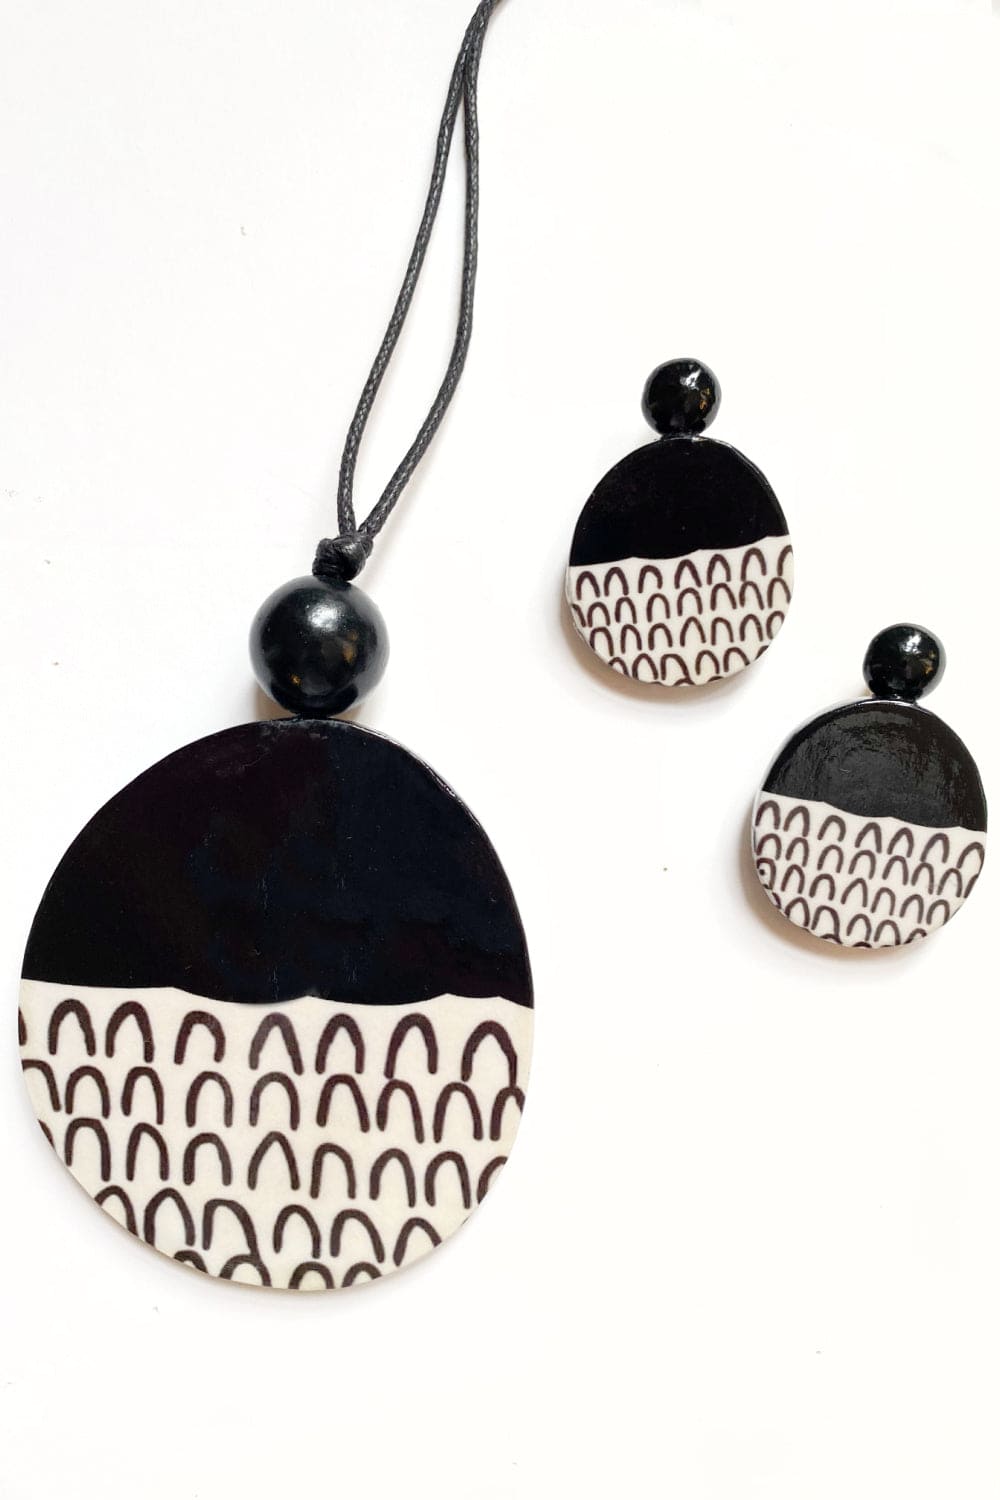 Black and White decoupage Necklace with matching earrings.